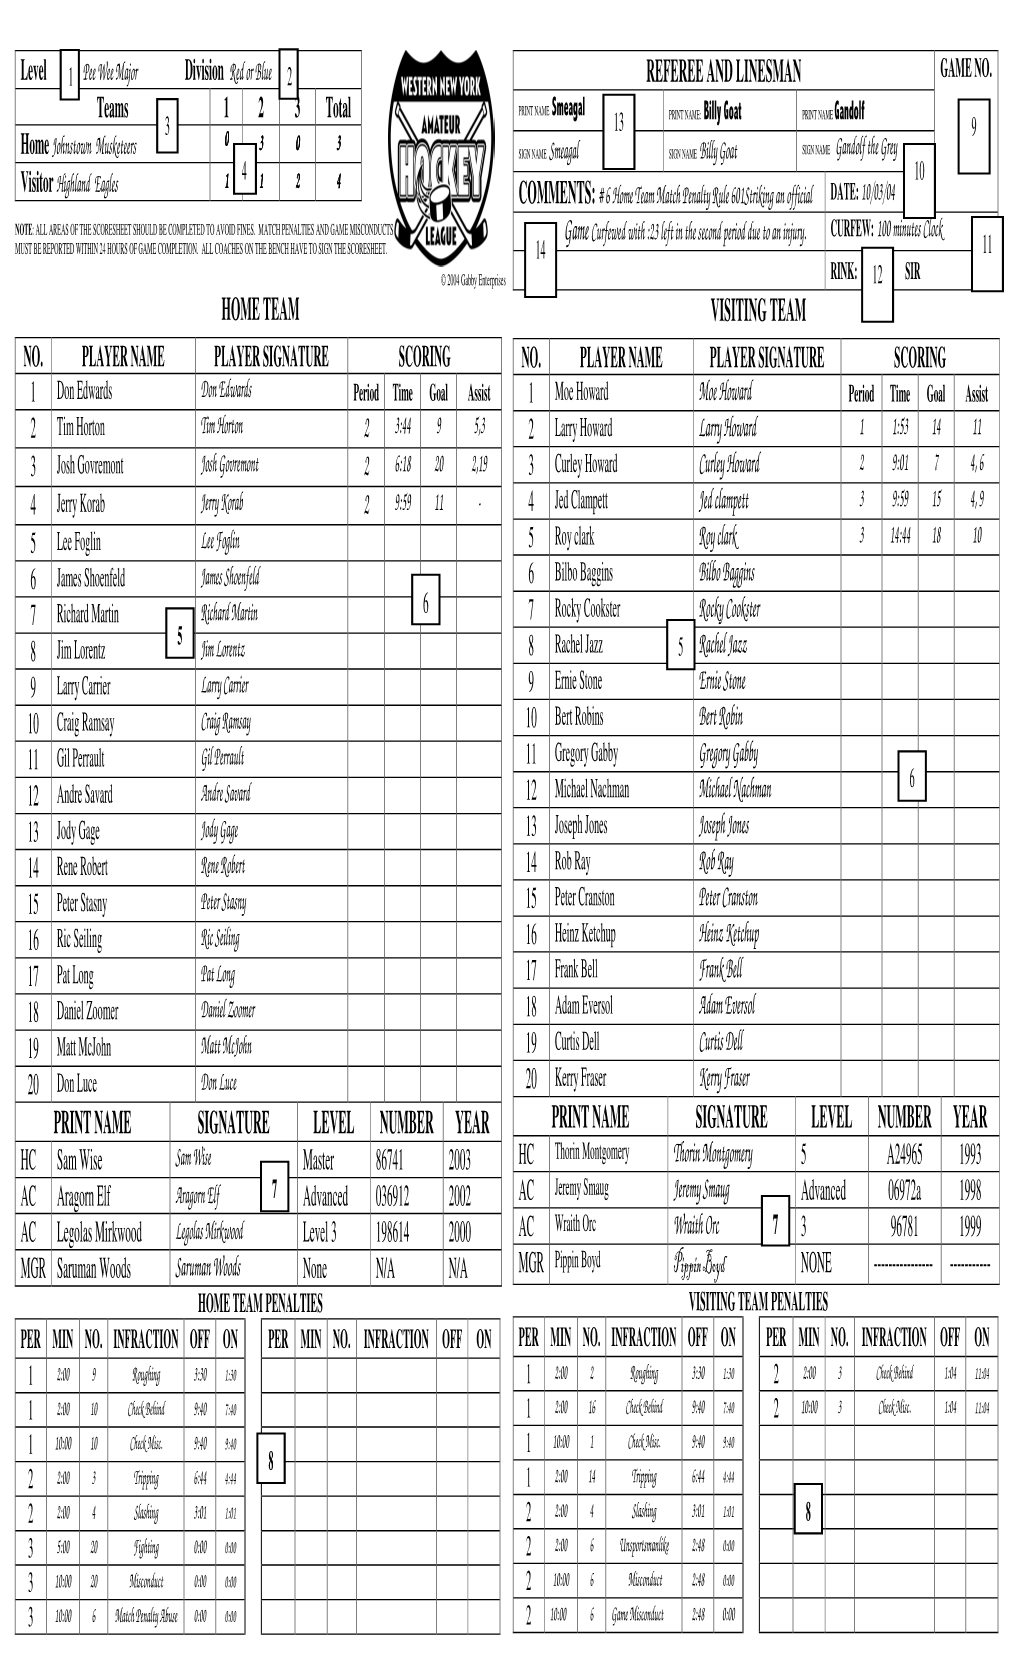 Completed Score Sheet